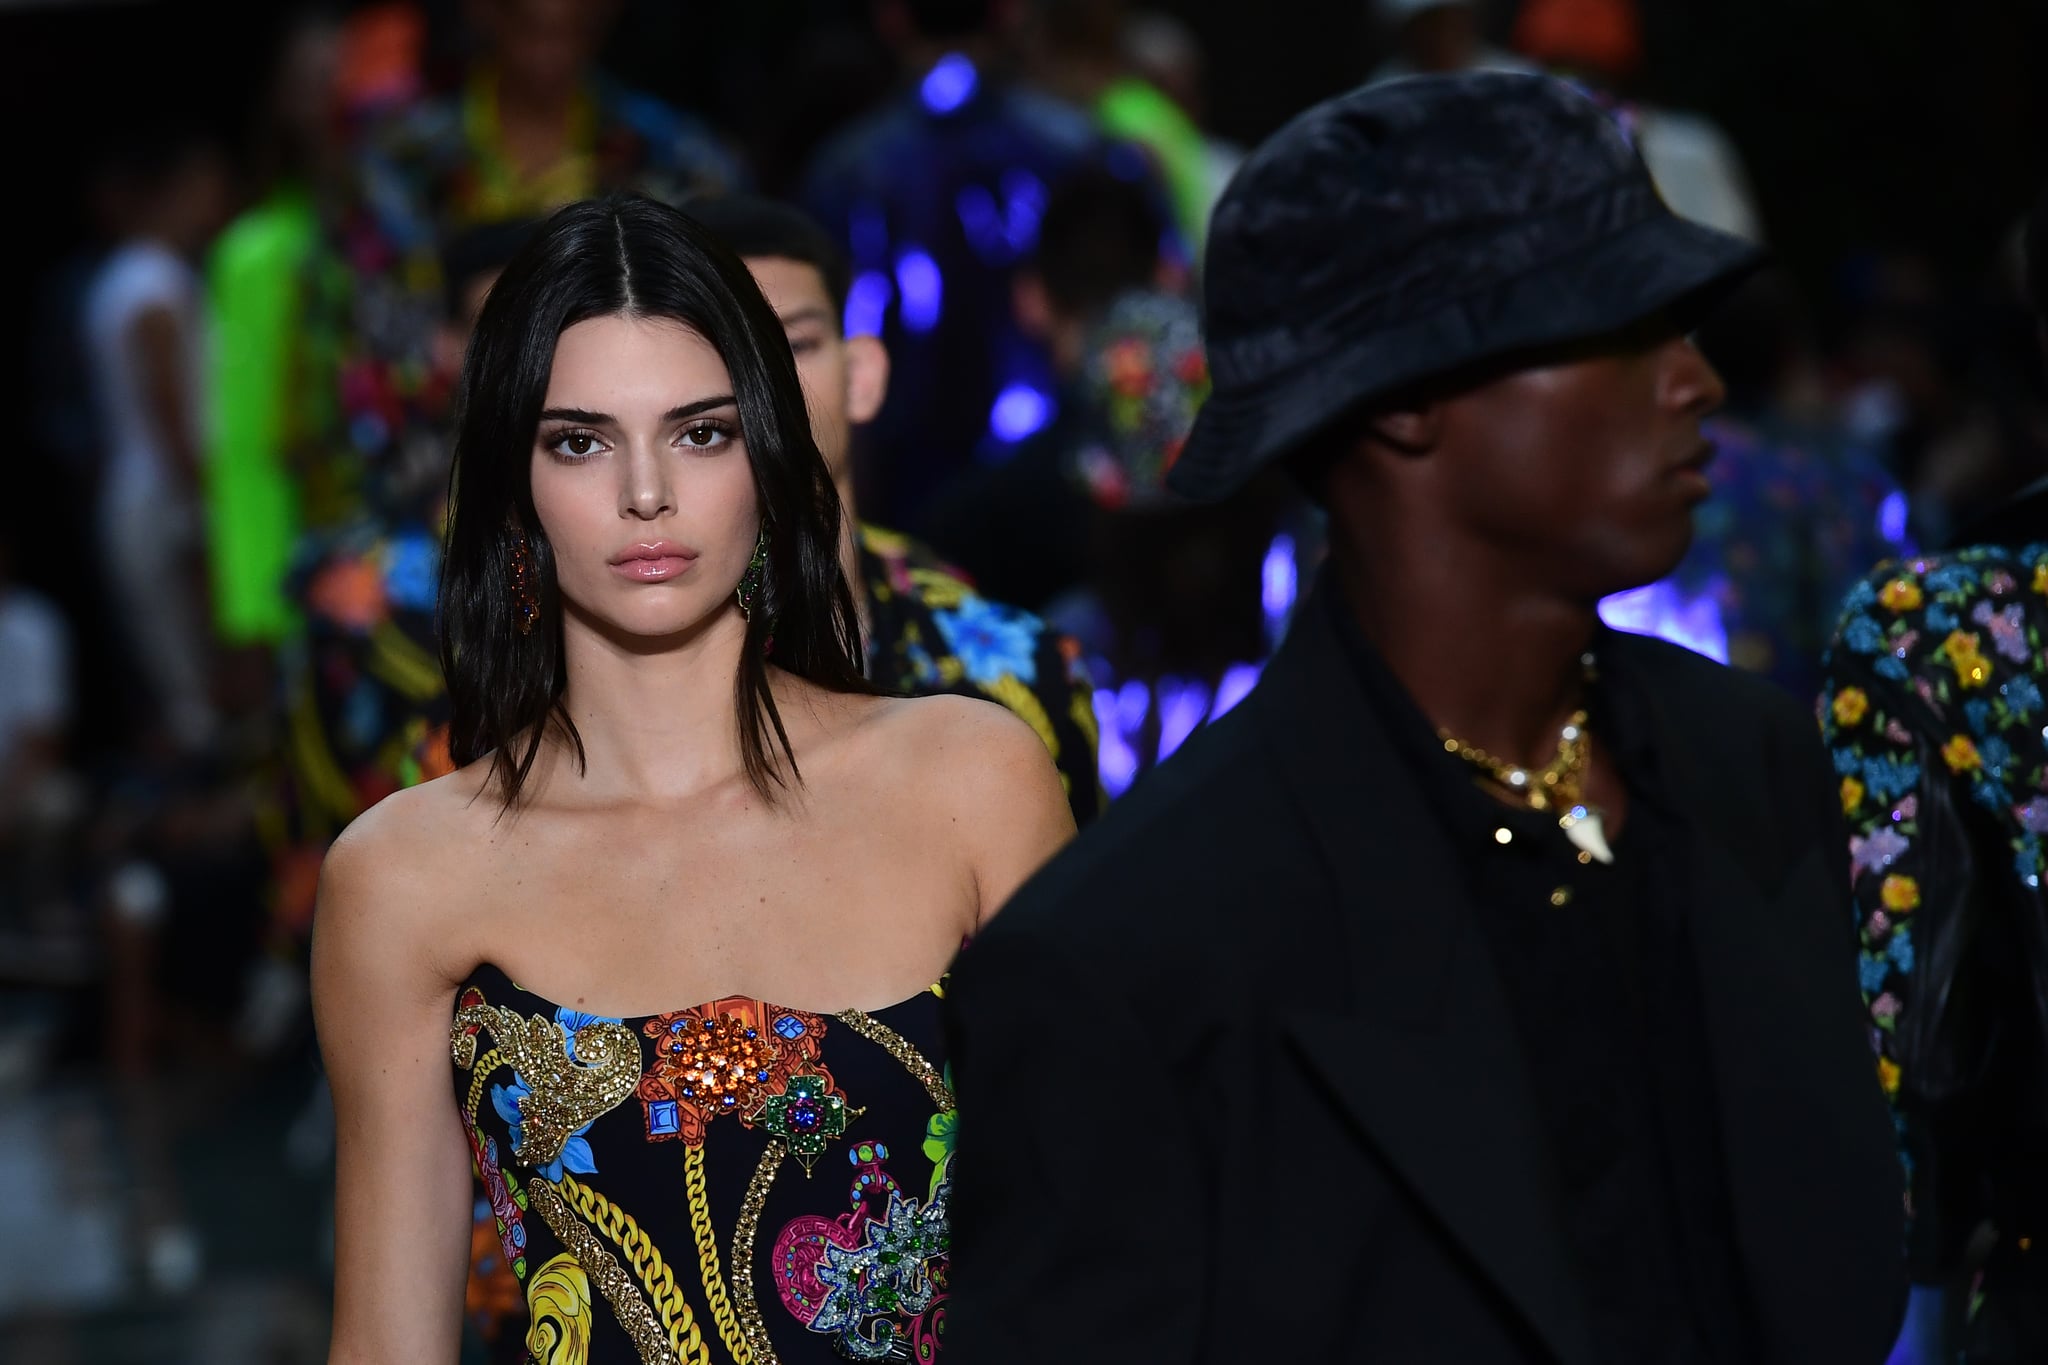 US model Kendall Jenner presents a creation by Versace during the men & women's spring/summer 2019 collection fashion show in Milan, on June 16, 2018. (Photo by MIGUEL MEDINA / AFP)        (Photo credit should read MIGUEL MEDINA/AFP/Getty Images)